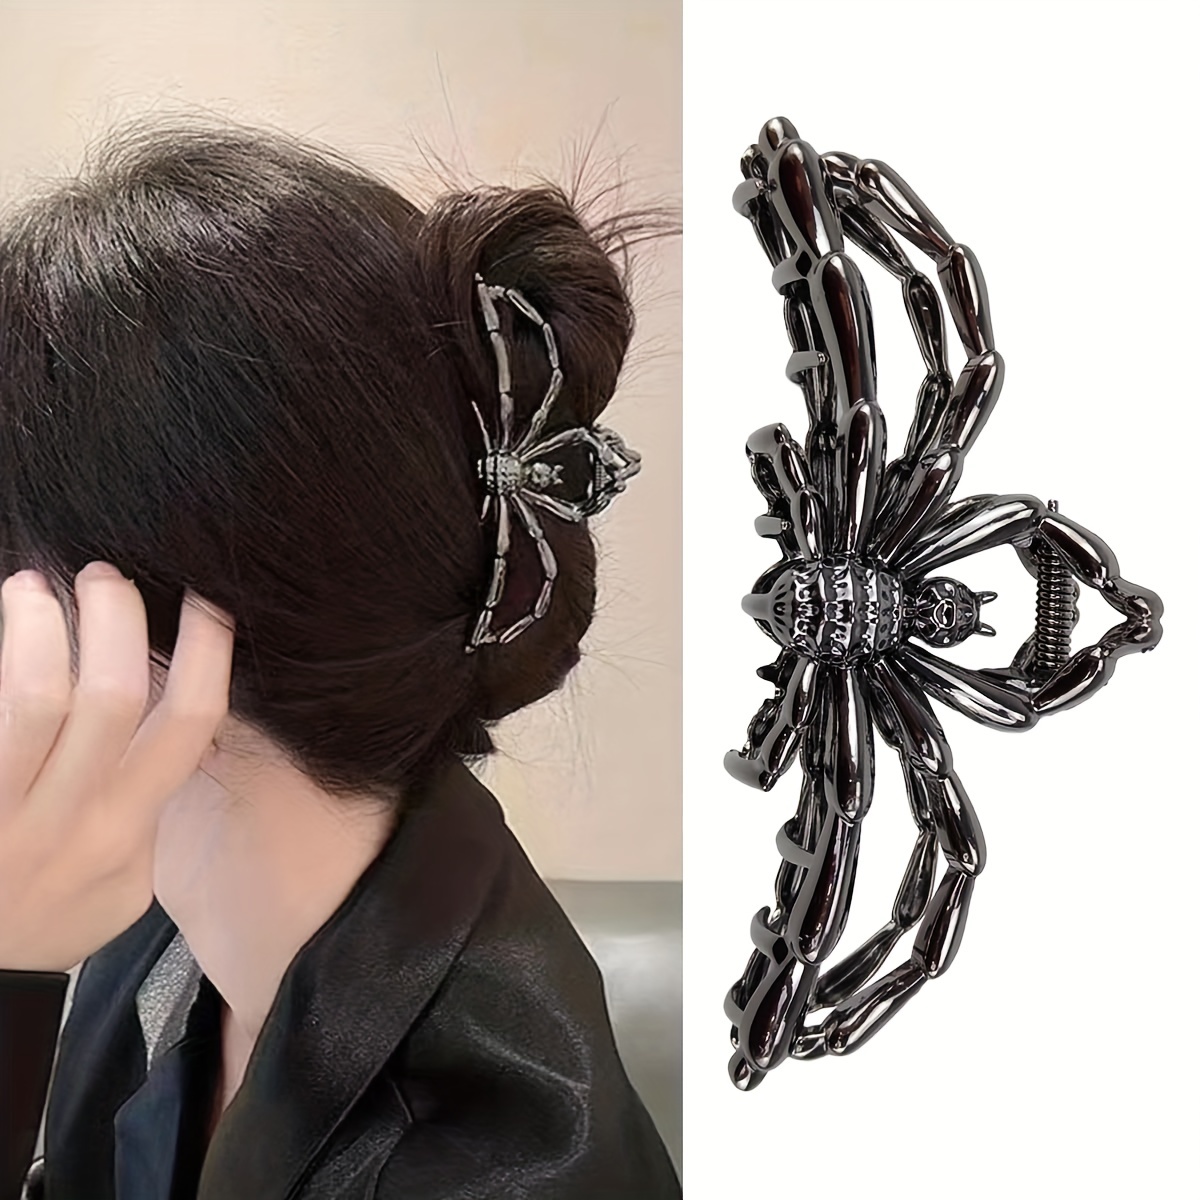 

1pc Spider Hair Clip Black Spider Claw Clip Large Metal Hair Claw Clips For Women Halloween Hair Accessories Hair Jaw Clips Nonslip Hair Clamp Clips For Thick Thin